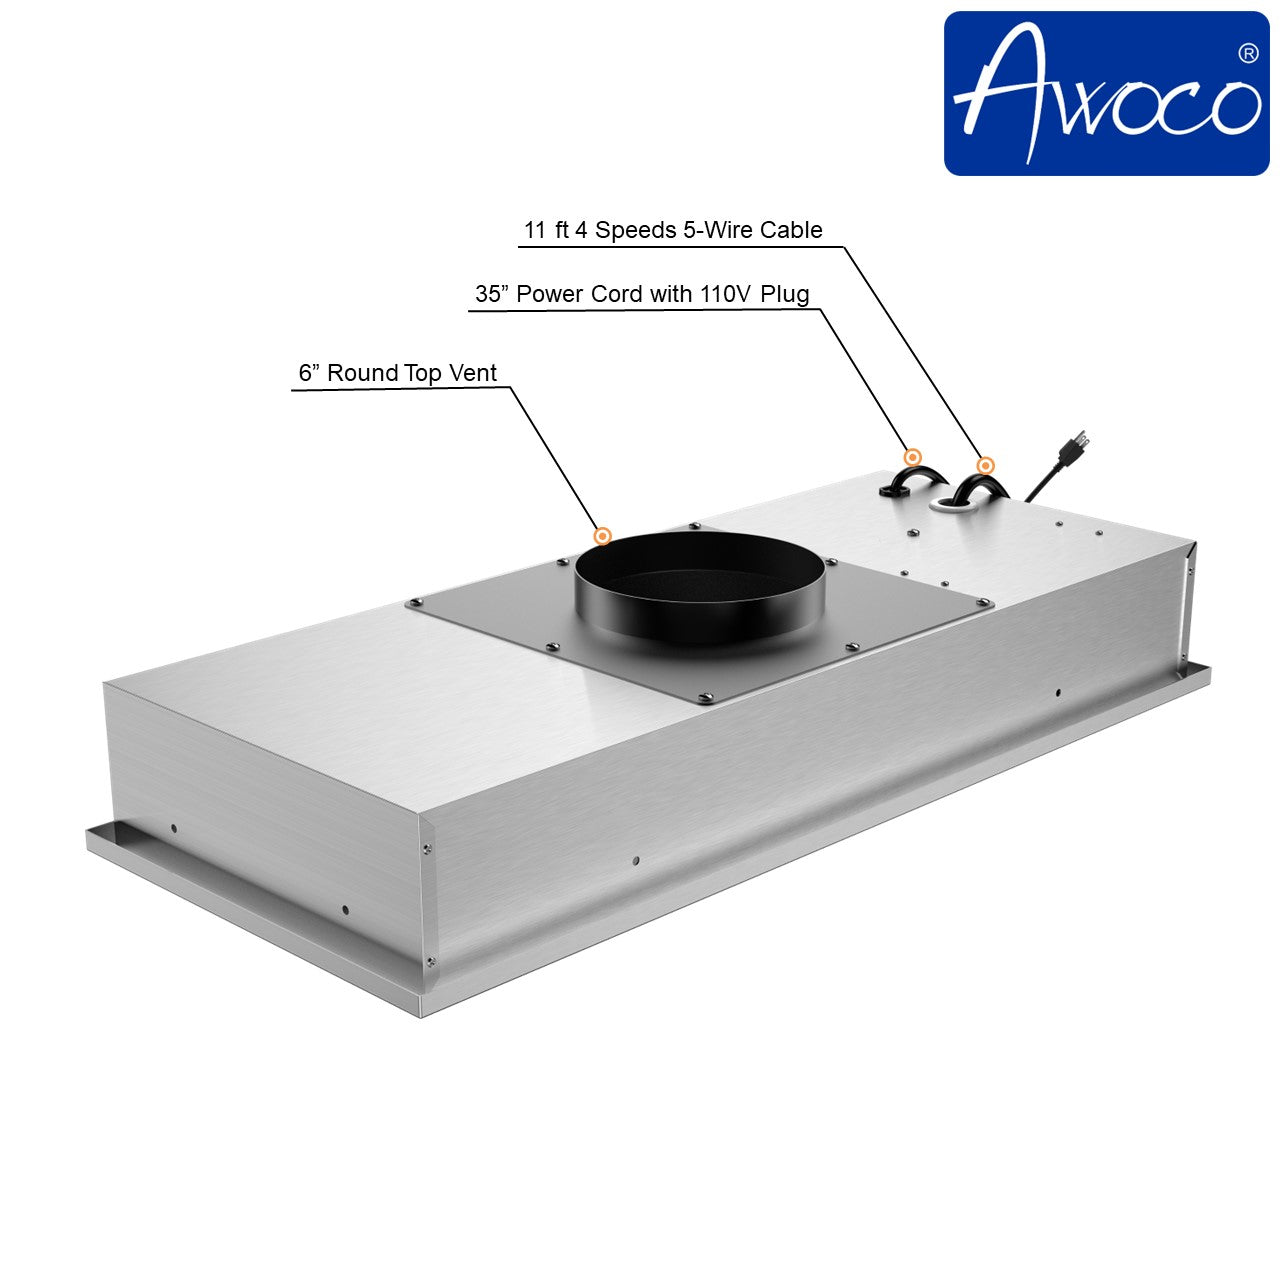 Awoco RH-IT08-R30 14-1/2”D Super Quiet Split Insert Ceiling Mount Stainless Steel Range Hood, 4-Speed, 1000 CFM, LED Lights with 8” Blower & Remote Control (30"W 8" Vent)